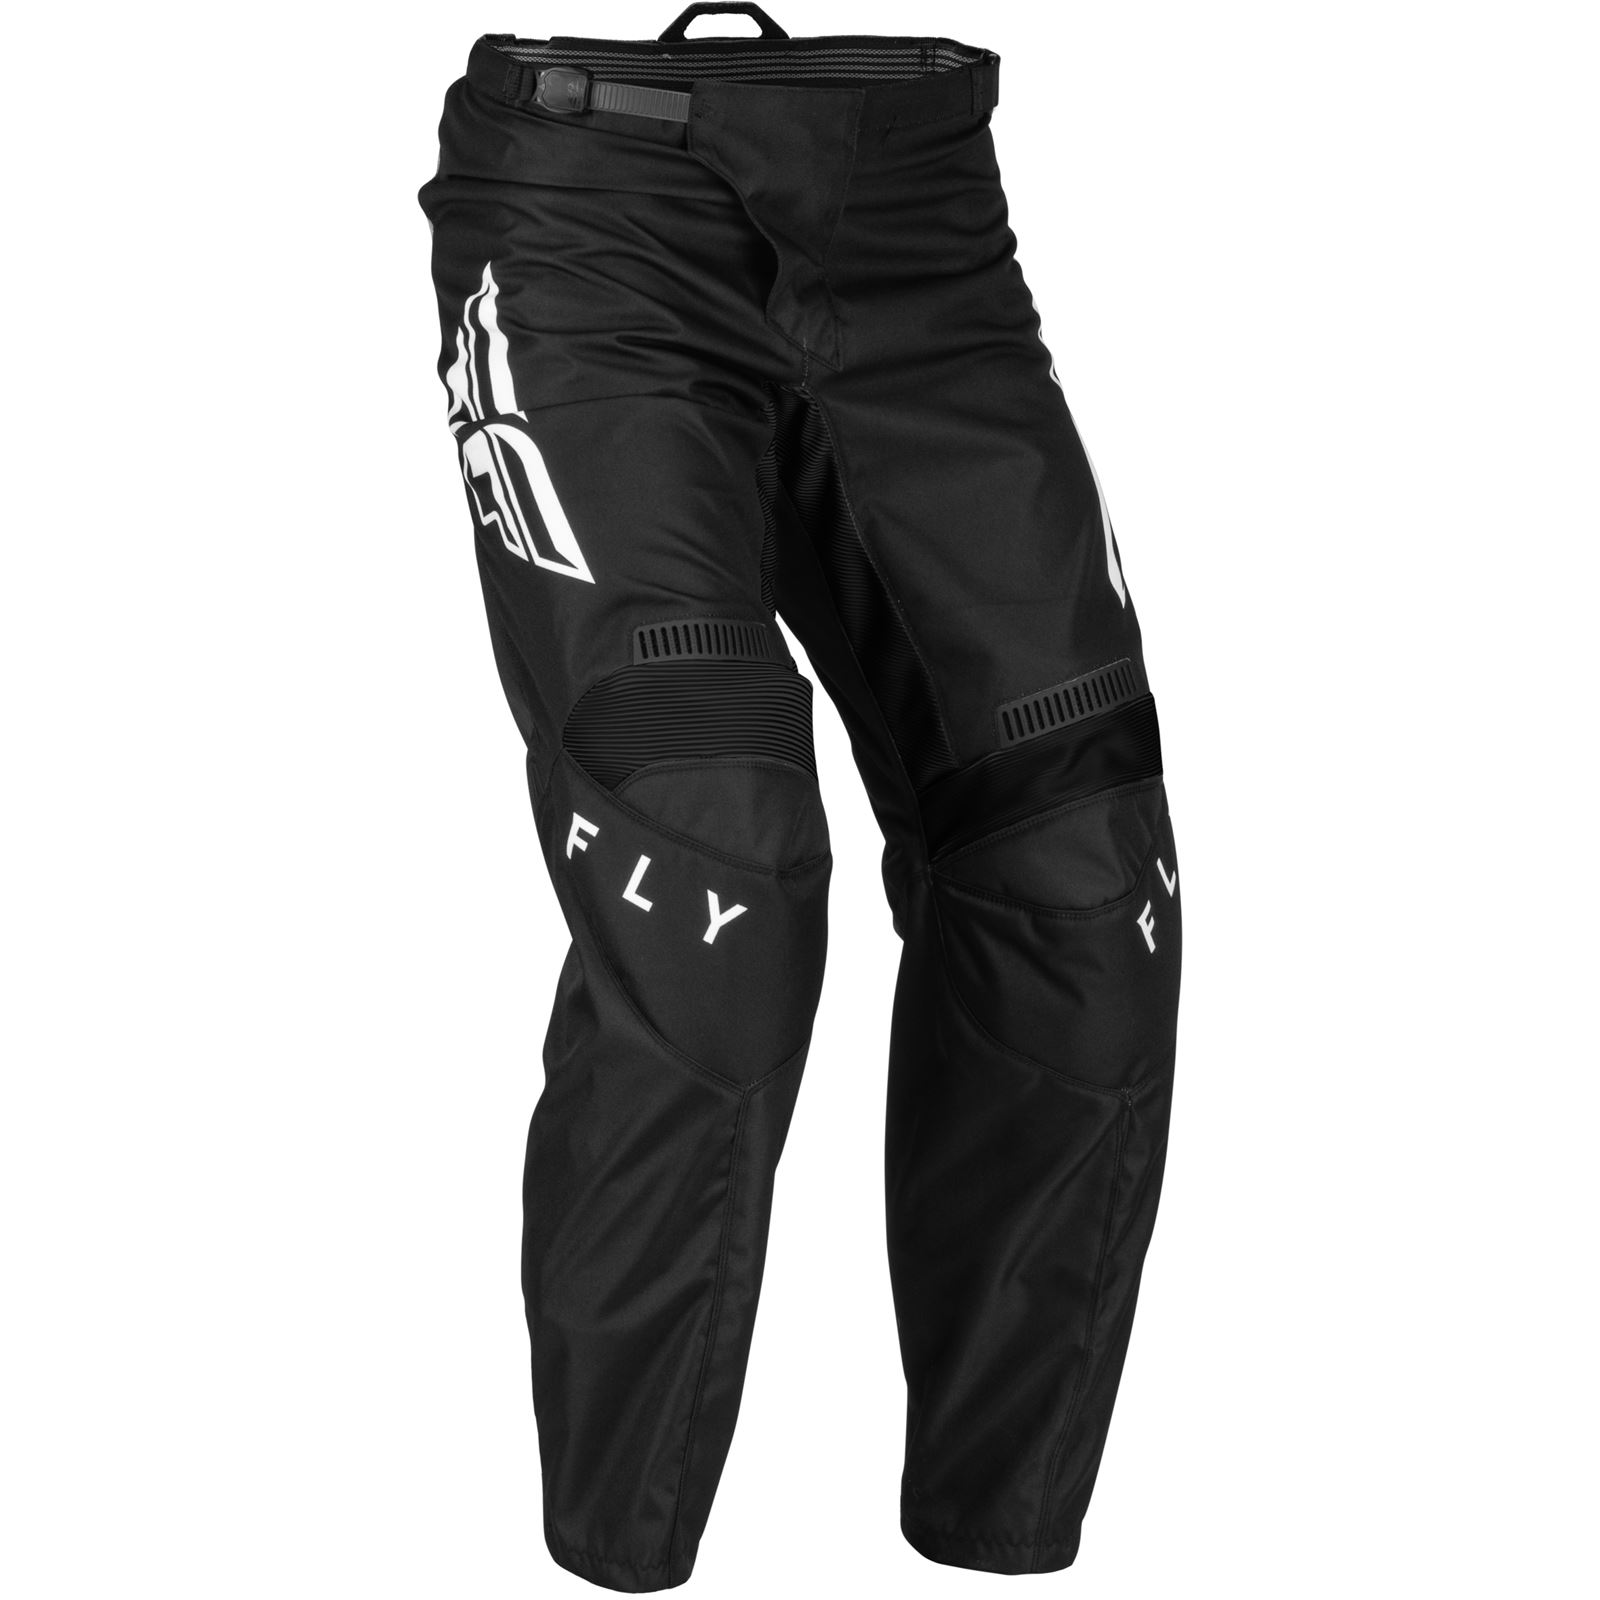 Fly Racing F-16 Pants - Black/White - Size 30